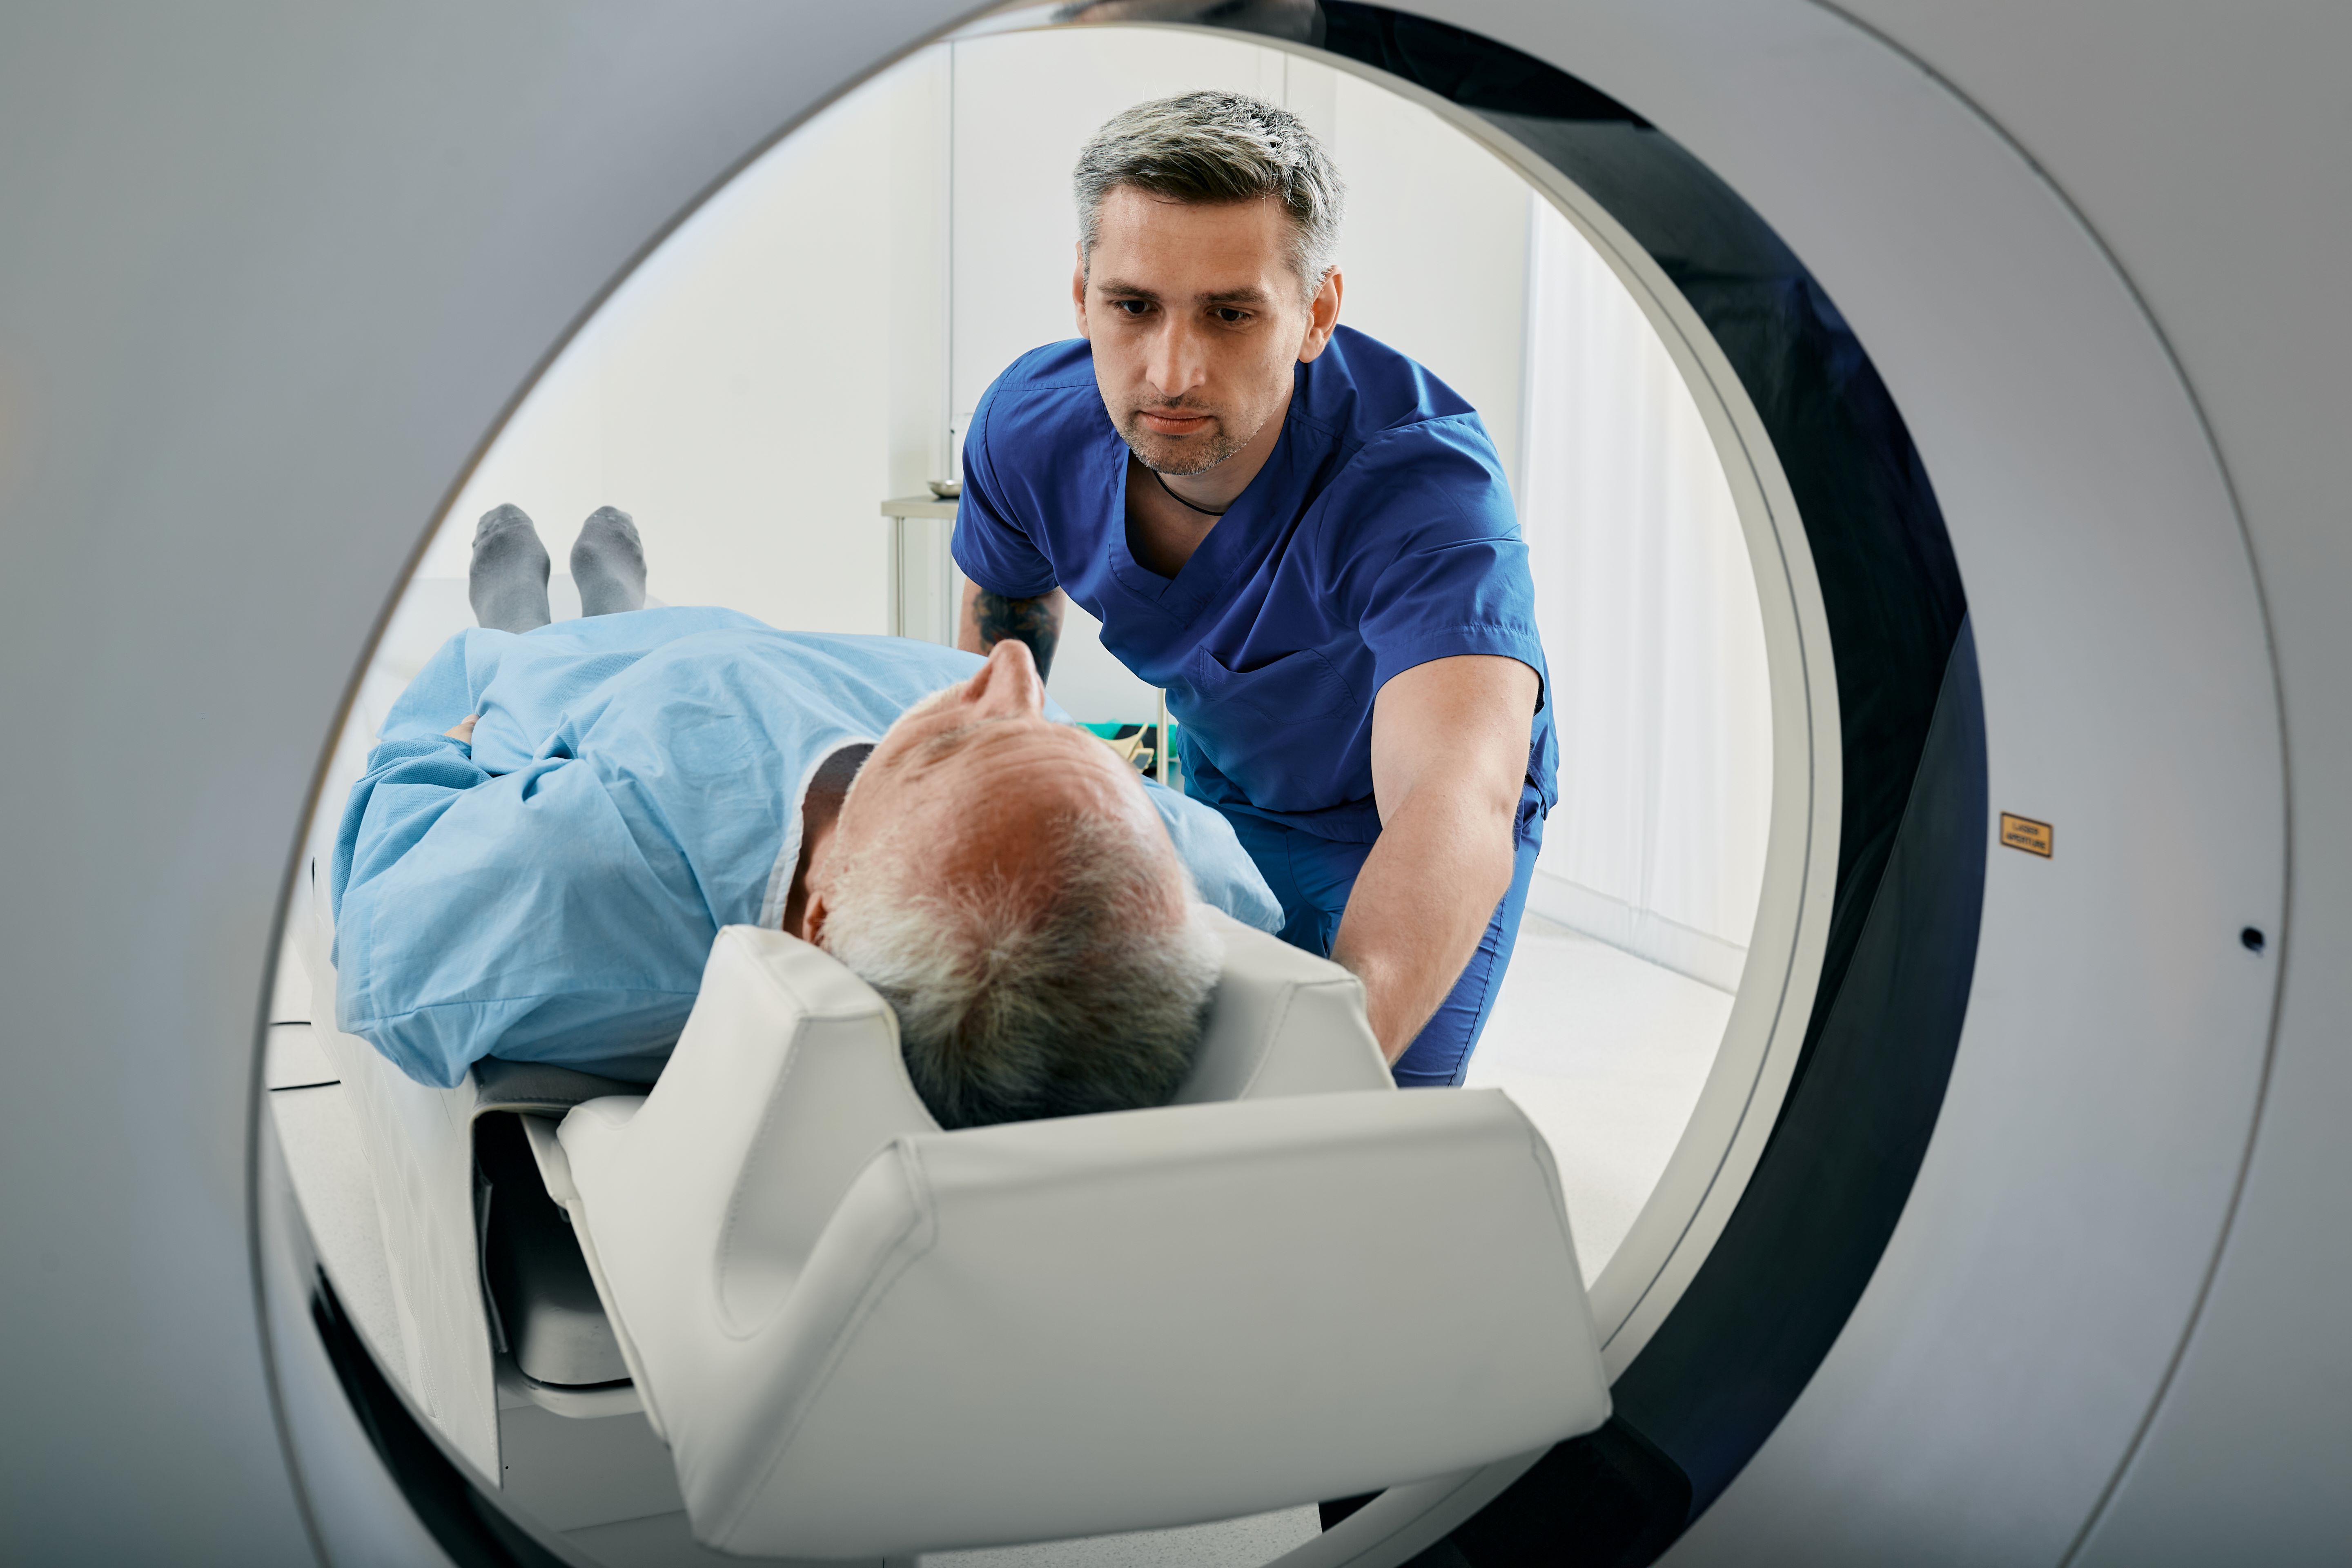 doctor and patient with MRI machine